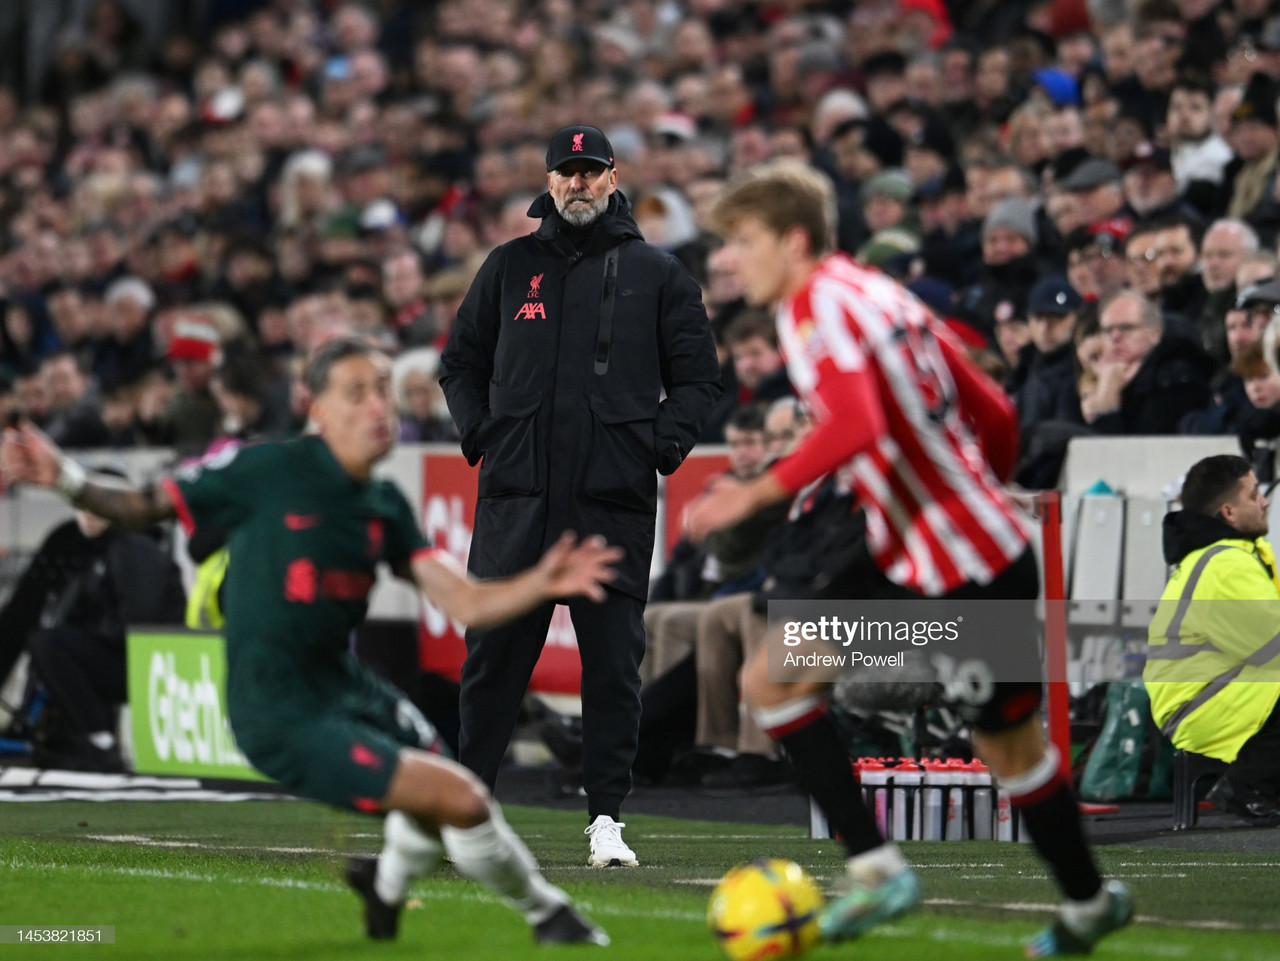 "The third goal I can really not respect" - Jurgen Klopp bemoans refereeing decisions as Brentford secure historic win 